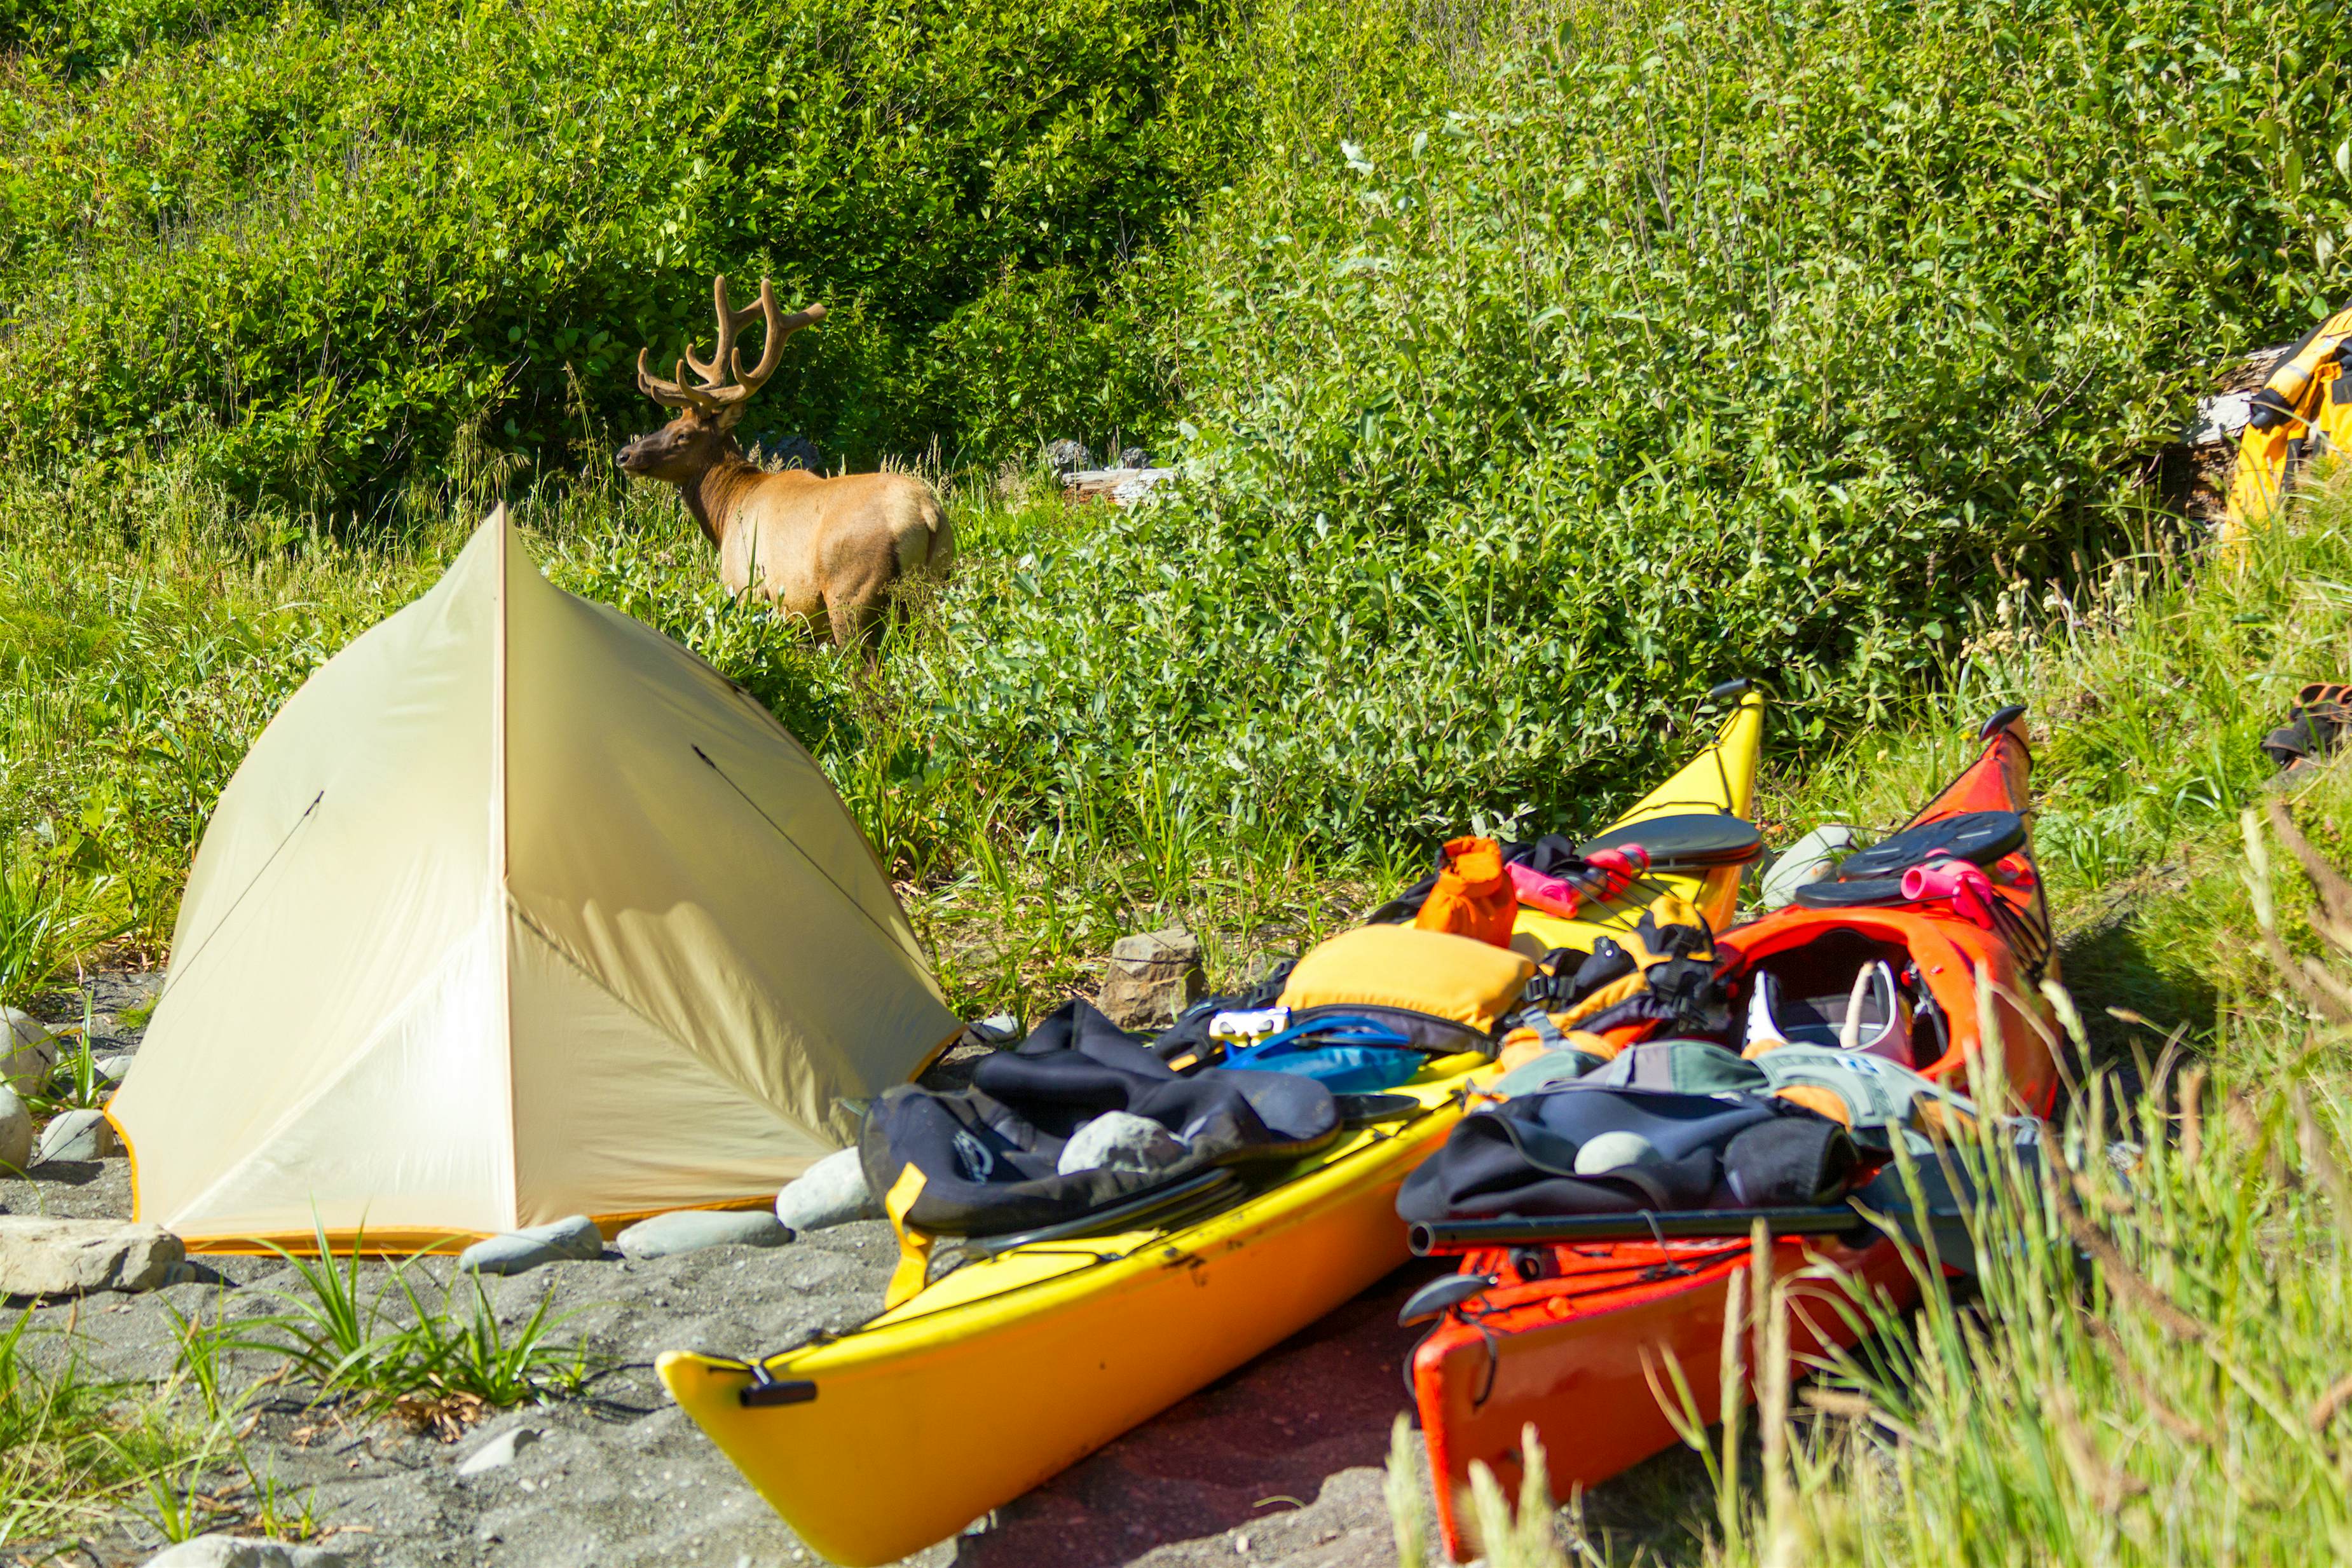 Two kayaks covered in gear are near a tent. A large elk stands beyond the tent at the edge of deep vegetation